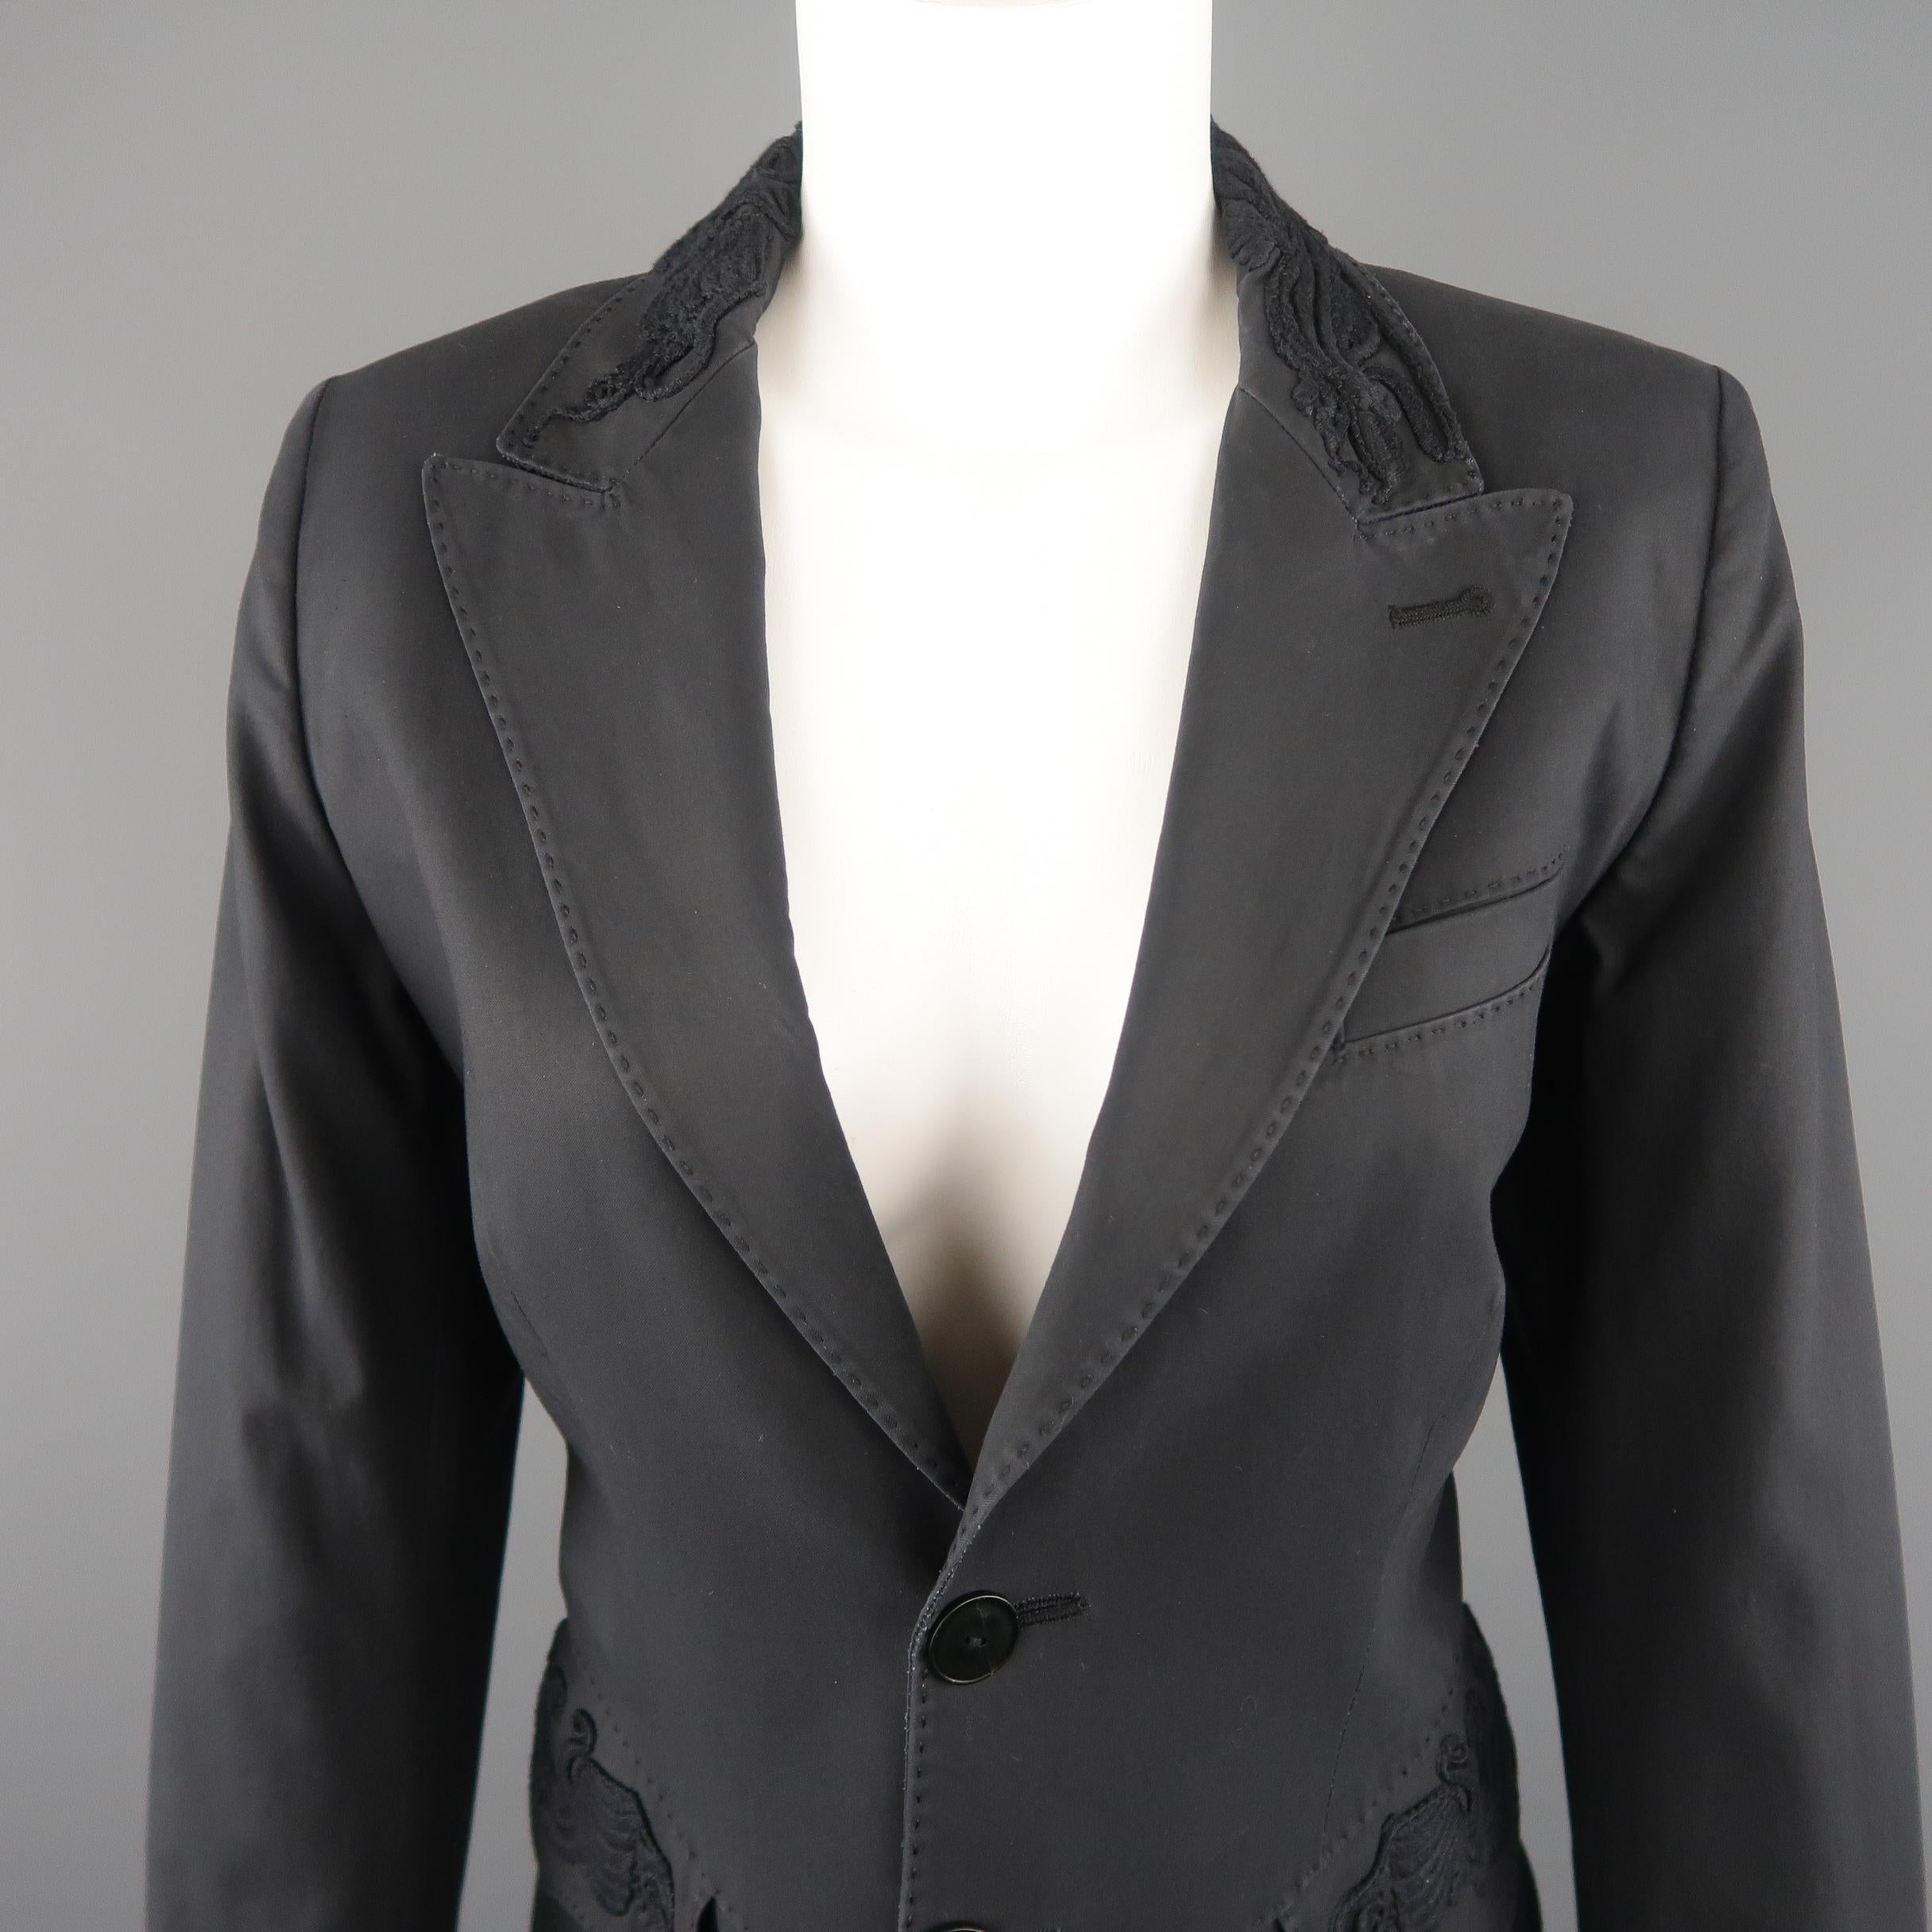 JEAN PAUL GAULTIER blazer jacket comes in dark gray cotton with a single breasted three button front, peak lapel, top stitching details throughout, functional button cuffs, detailed flap pockets, and embroidery accents. Wear throughout fabric.